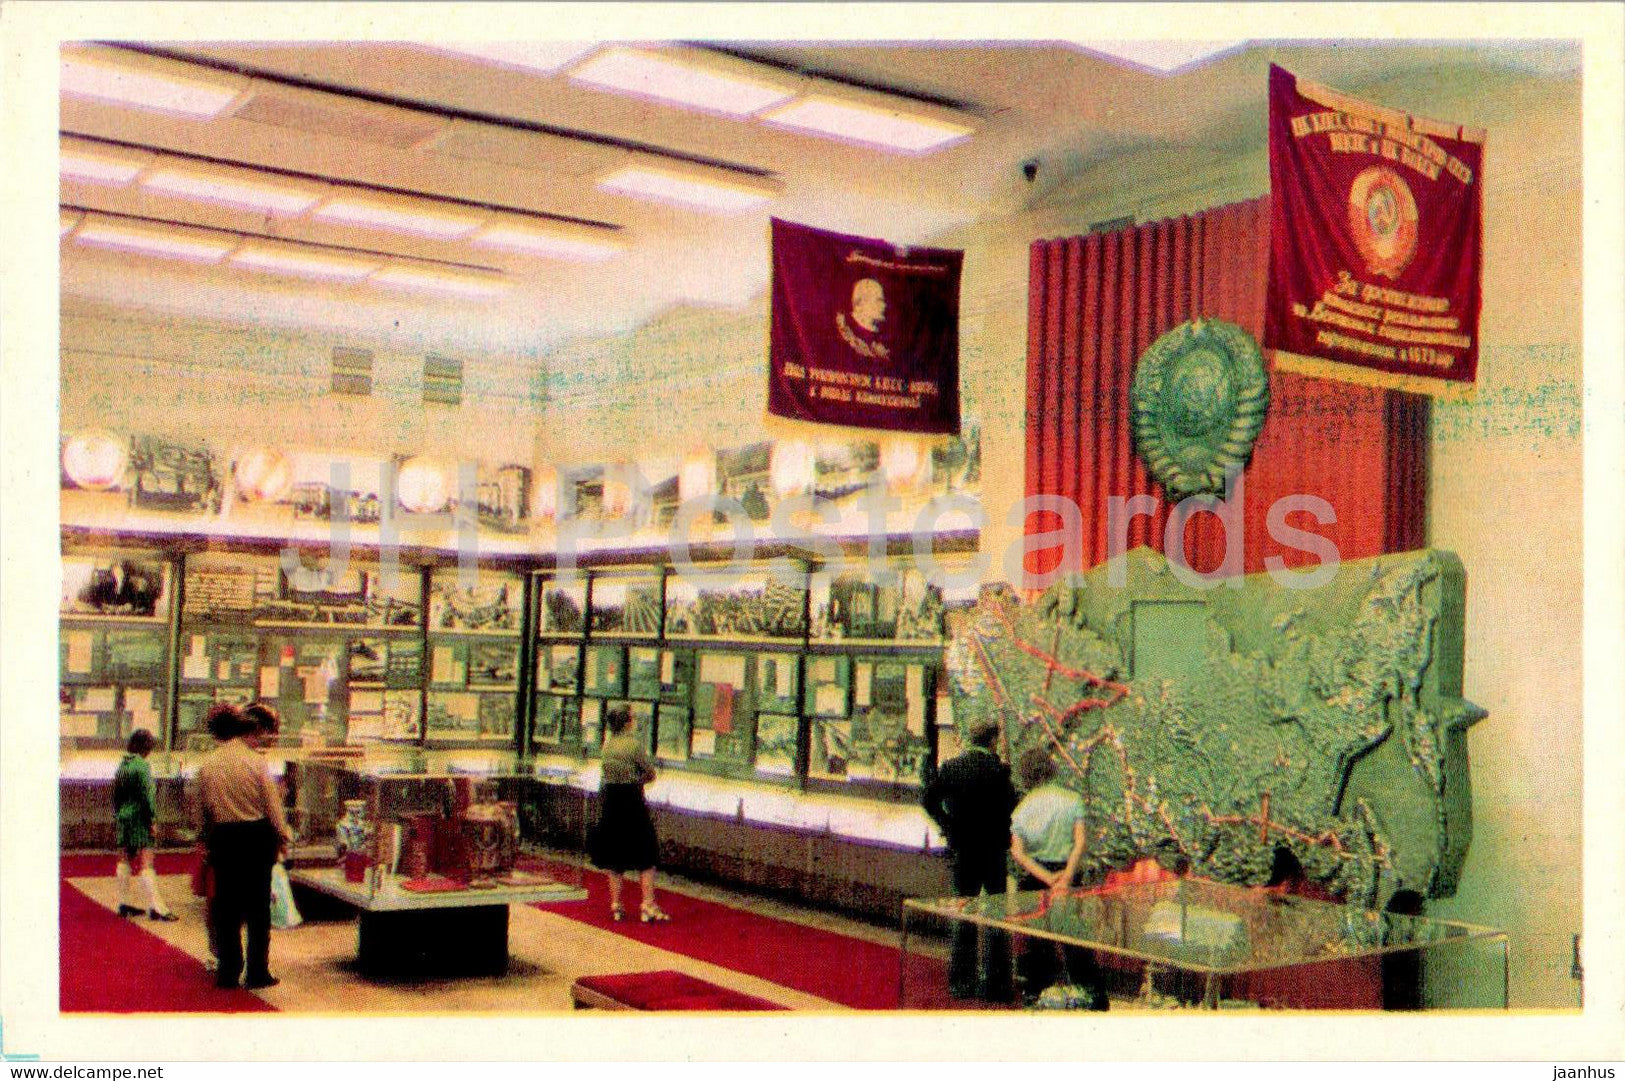 Moscow - Lenin Central Museum - part of the exposition of Socialist Community - 1978 - Russia USSR - unused - JH Postcards